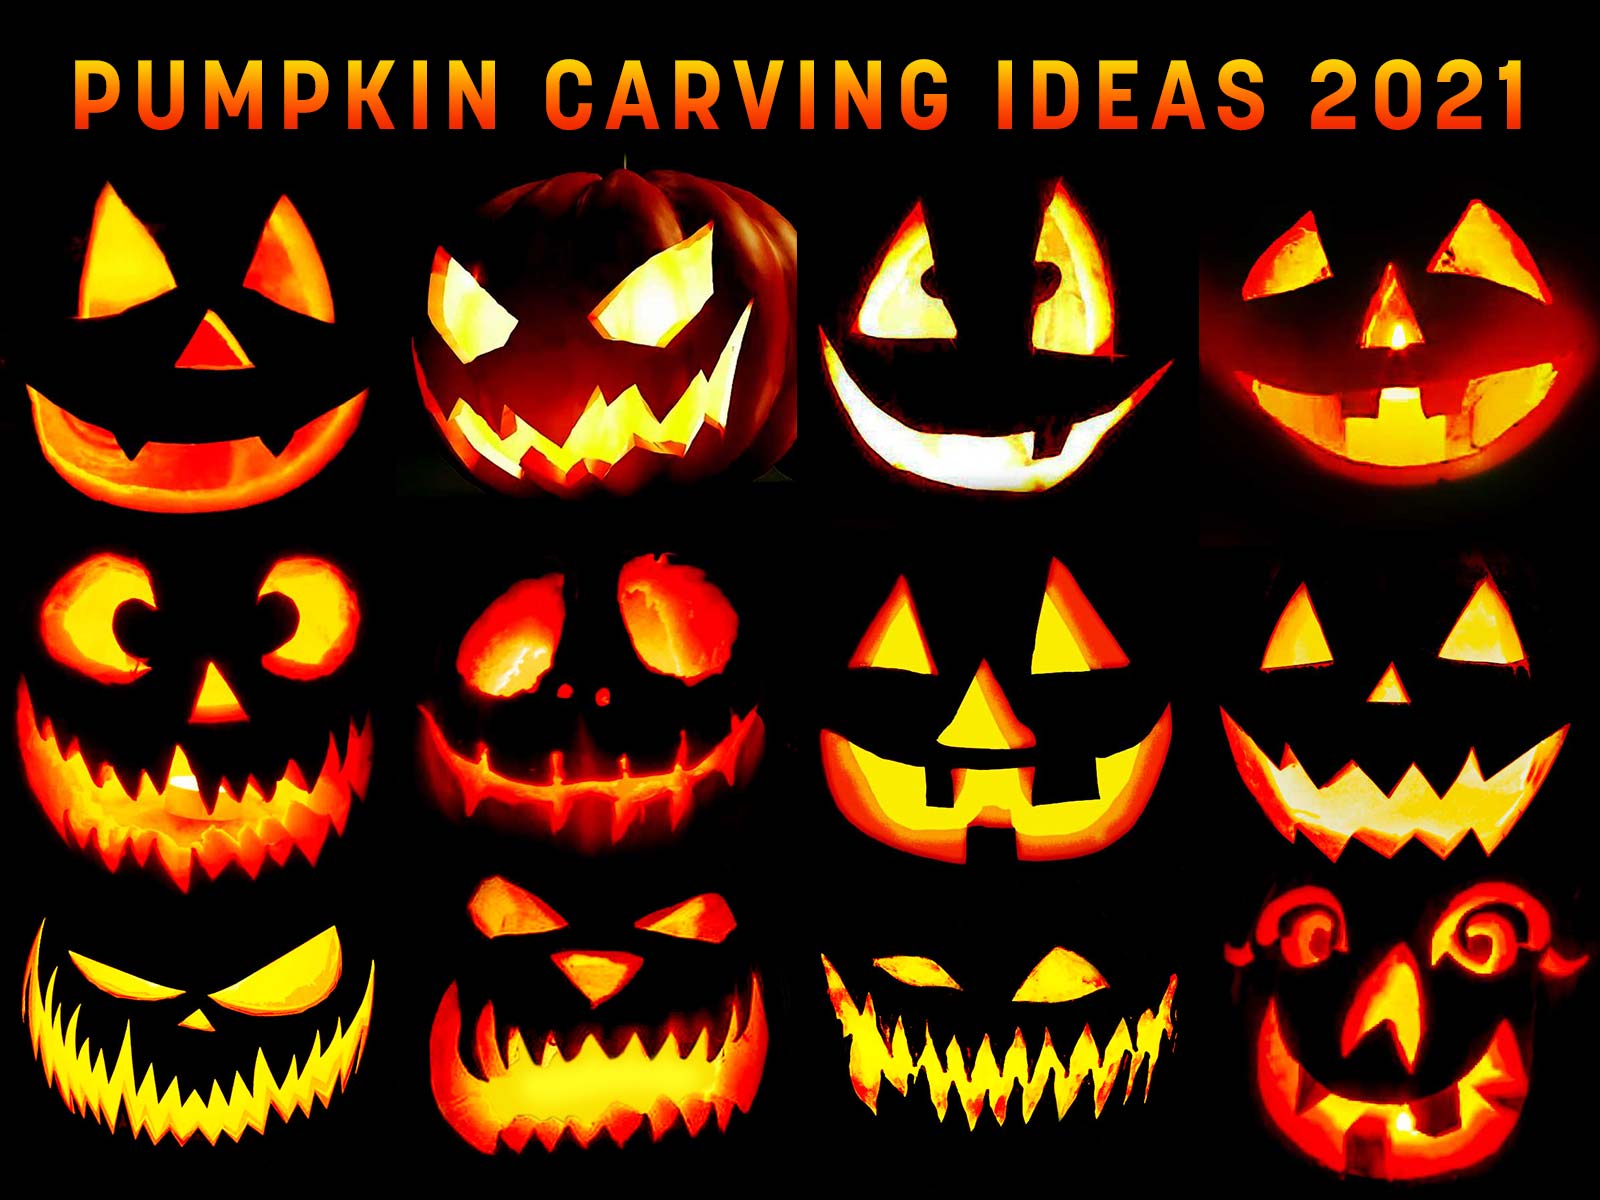 Free Scary Jack OLantern Carving Ideas and Faces 2021